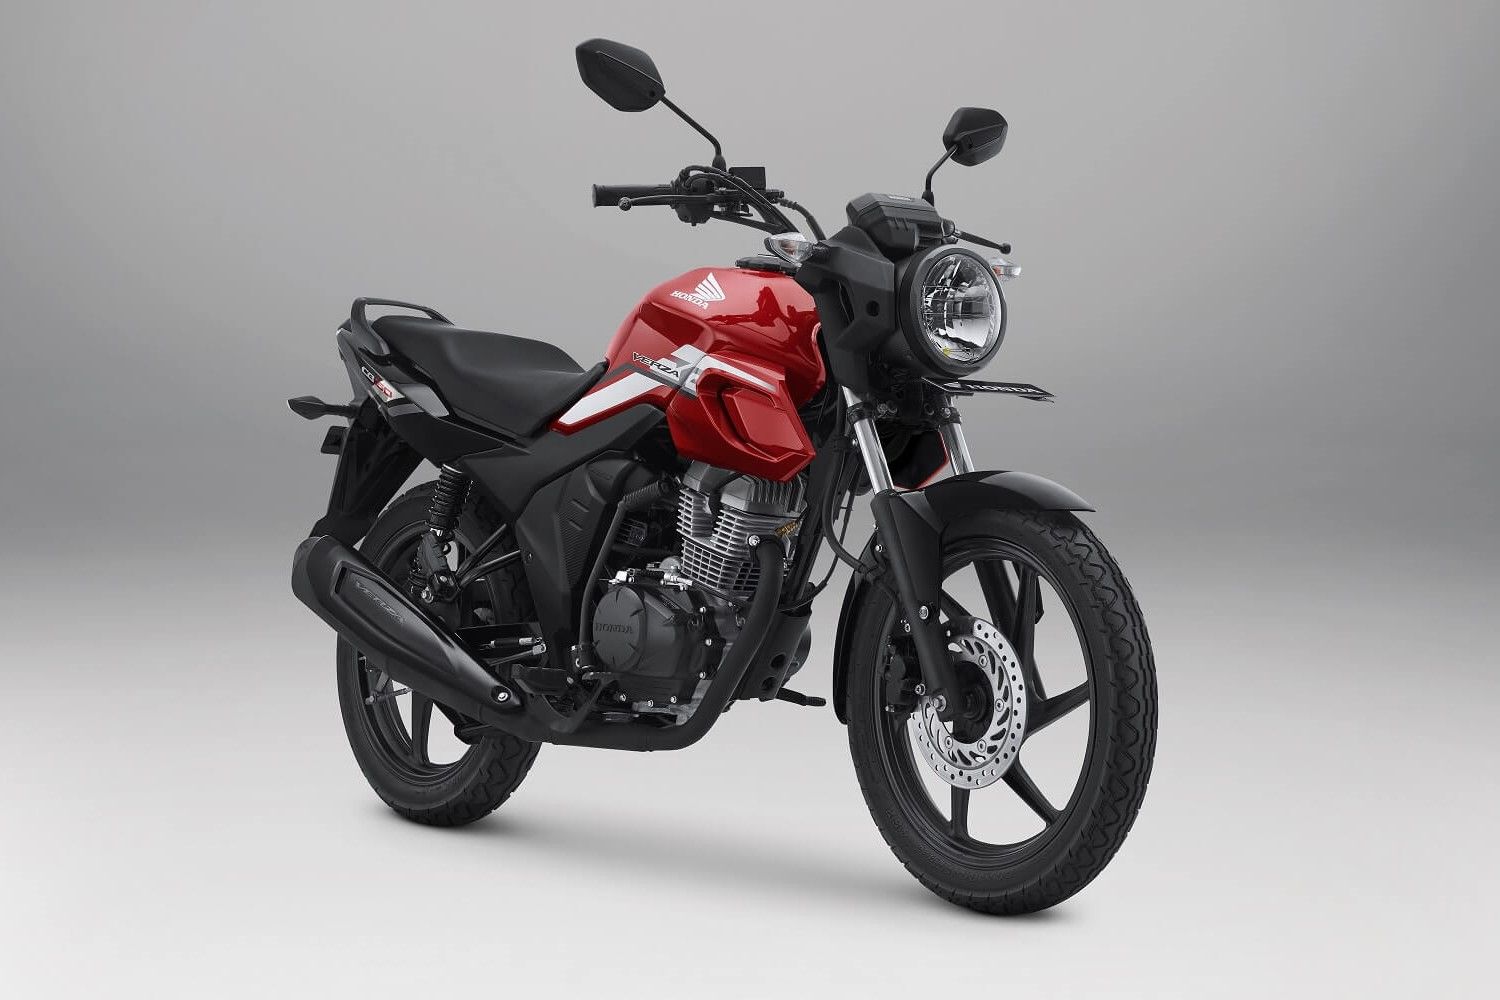 2021 Honda CB150 Verza gains new colors and graphics in Indonesia ...